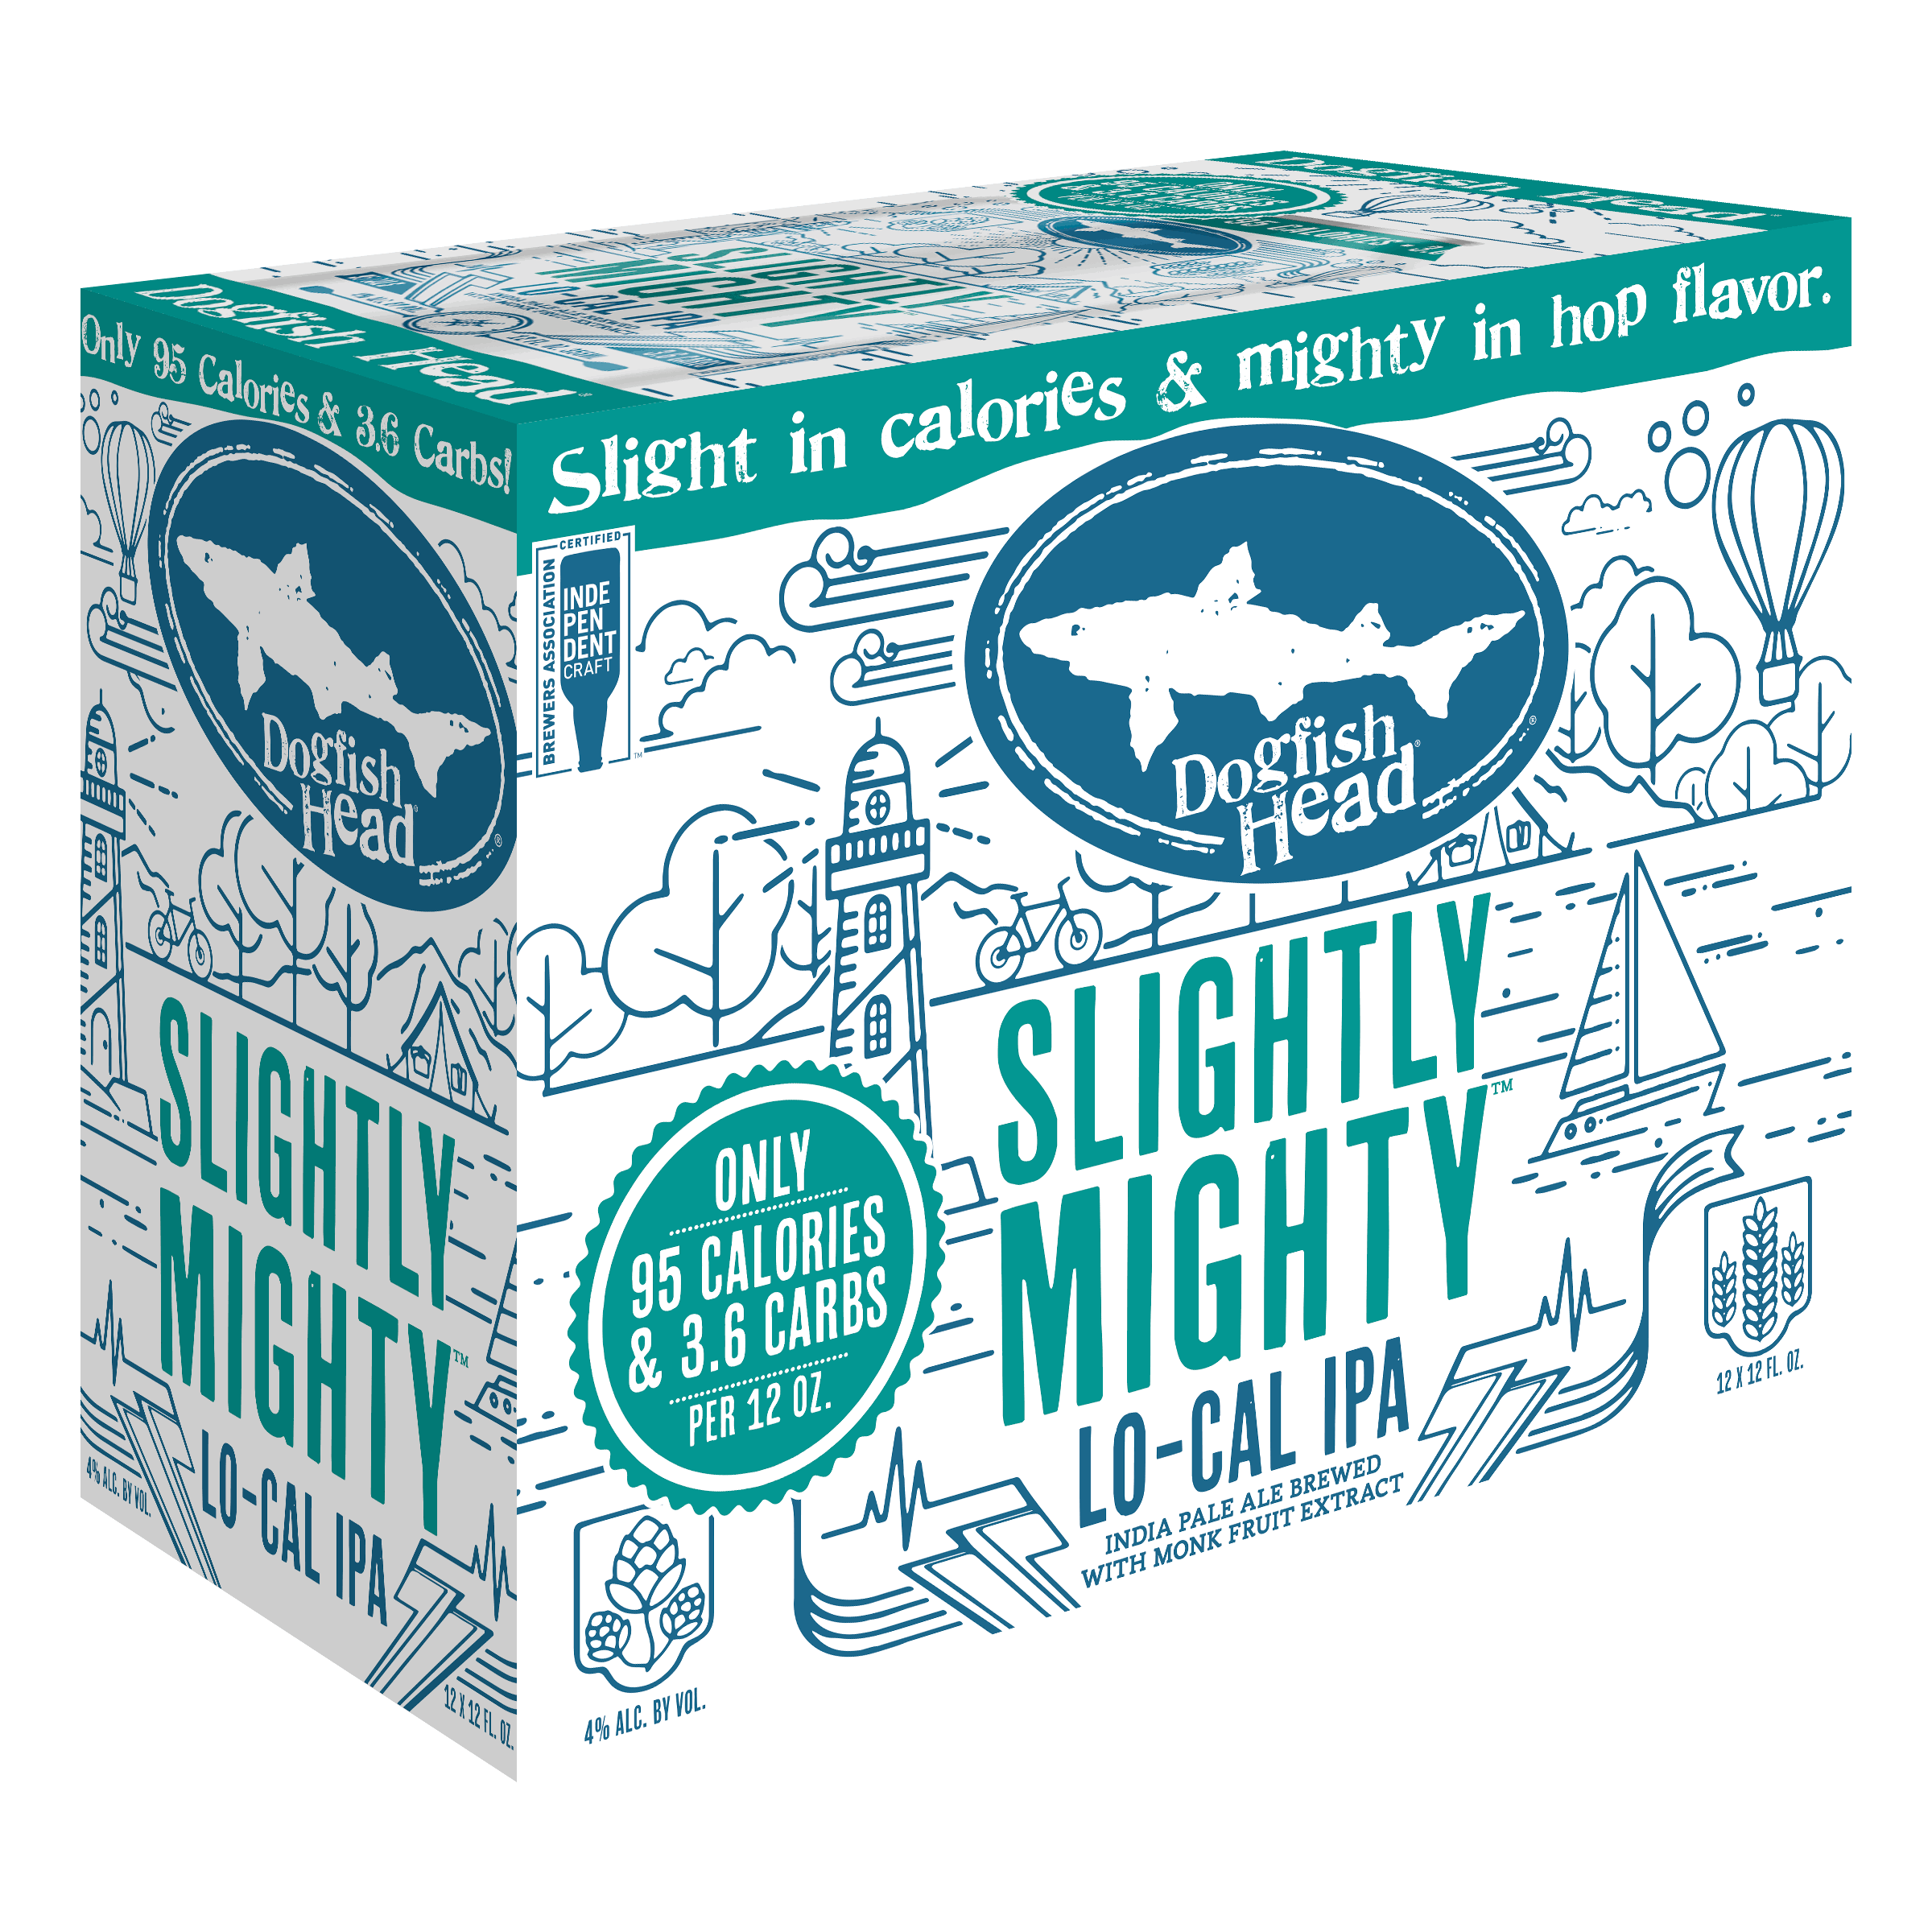 Dogfish Head Beer, Lo-Cal IPA, Slightly Mighty, 12 Pack - 12 pack, 12 fl oz cans